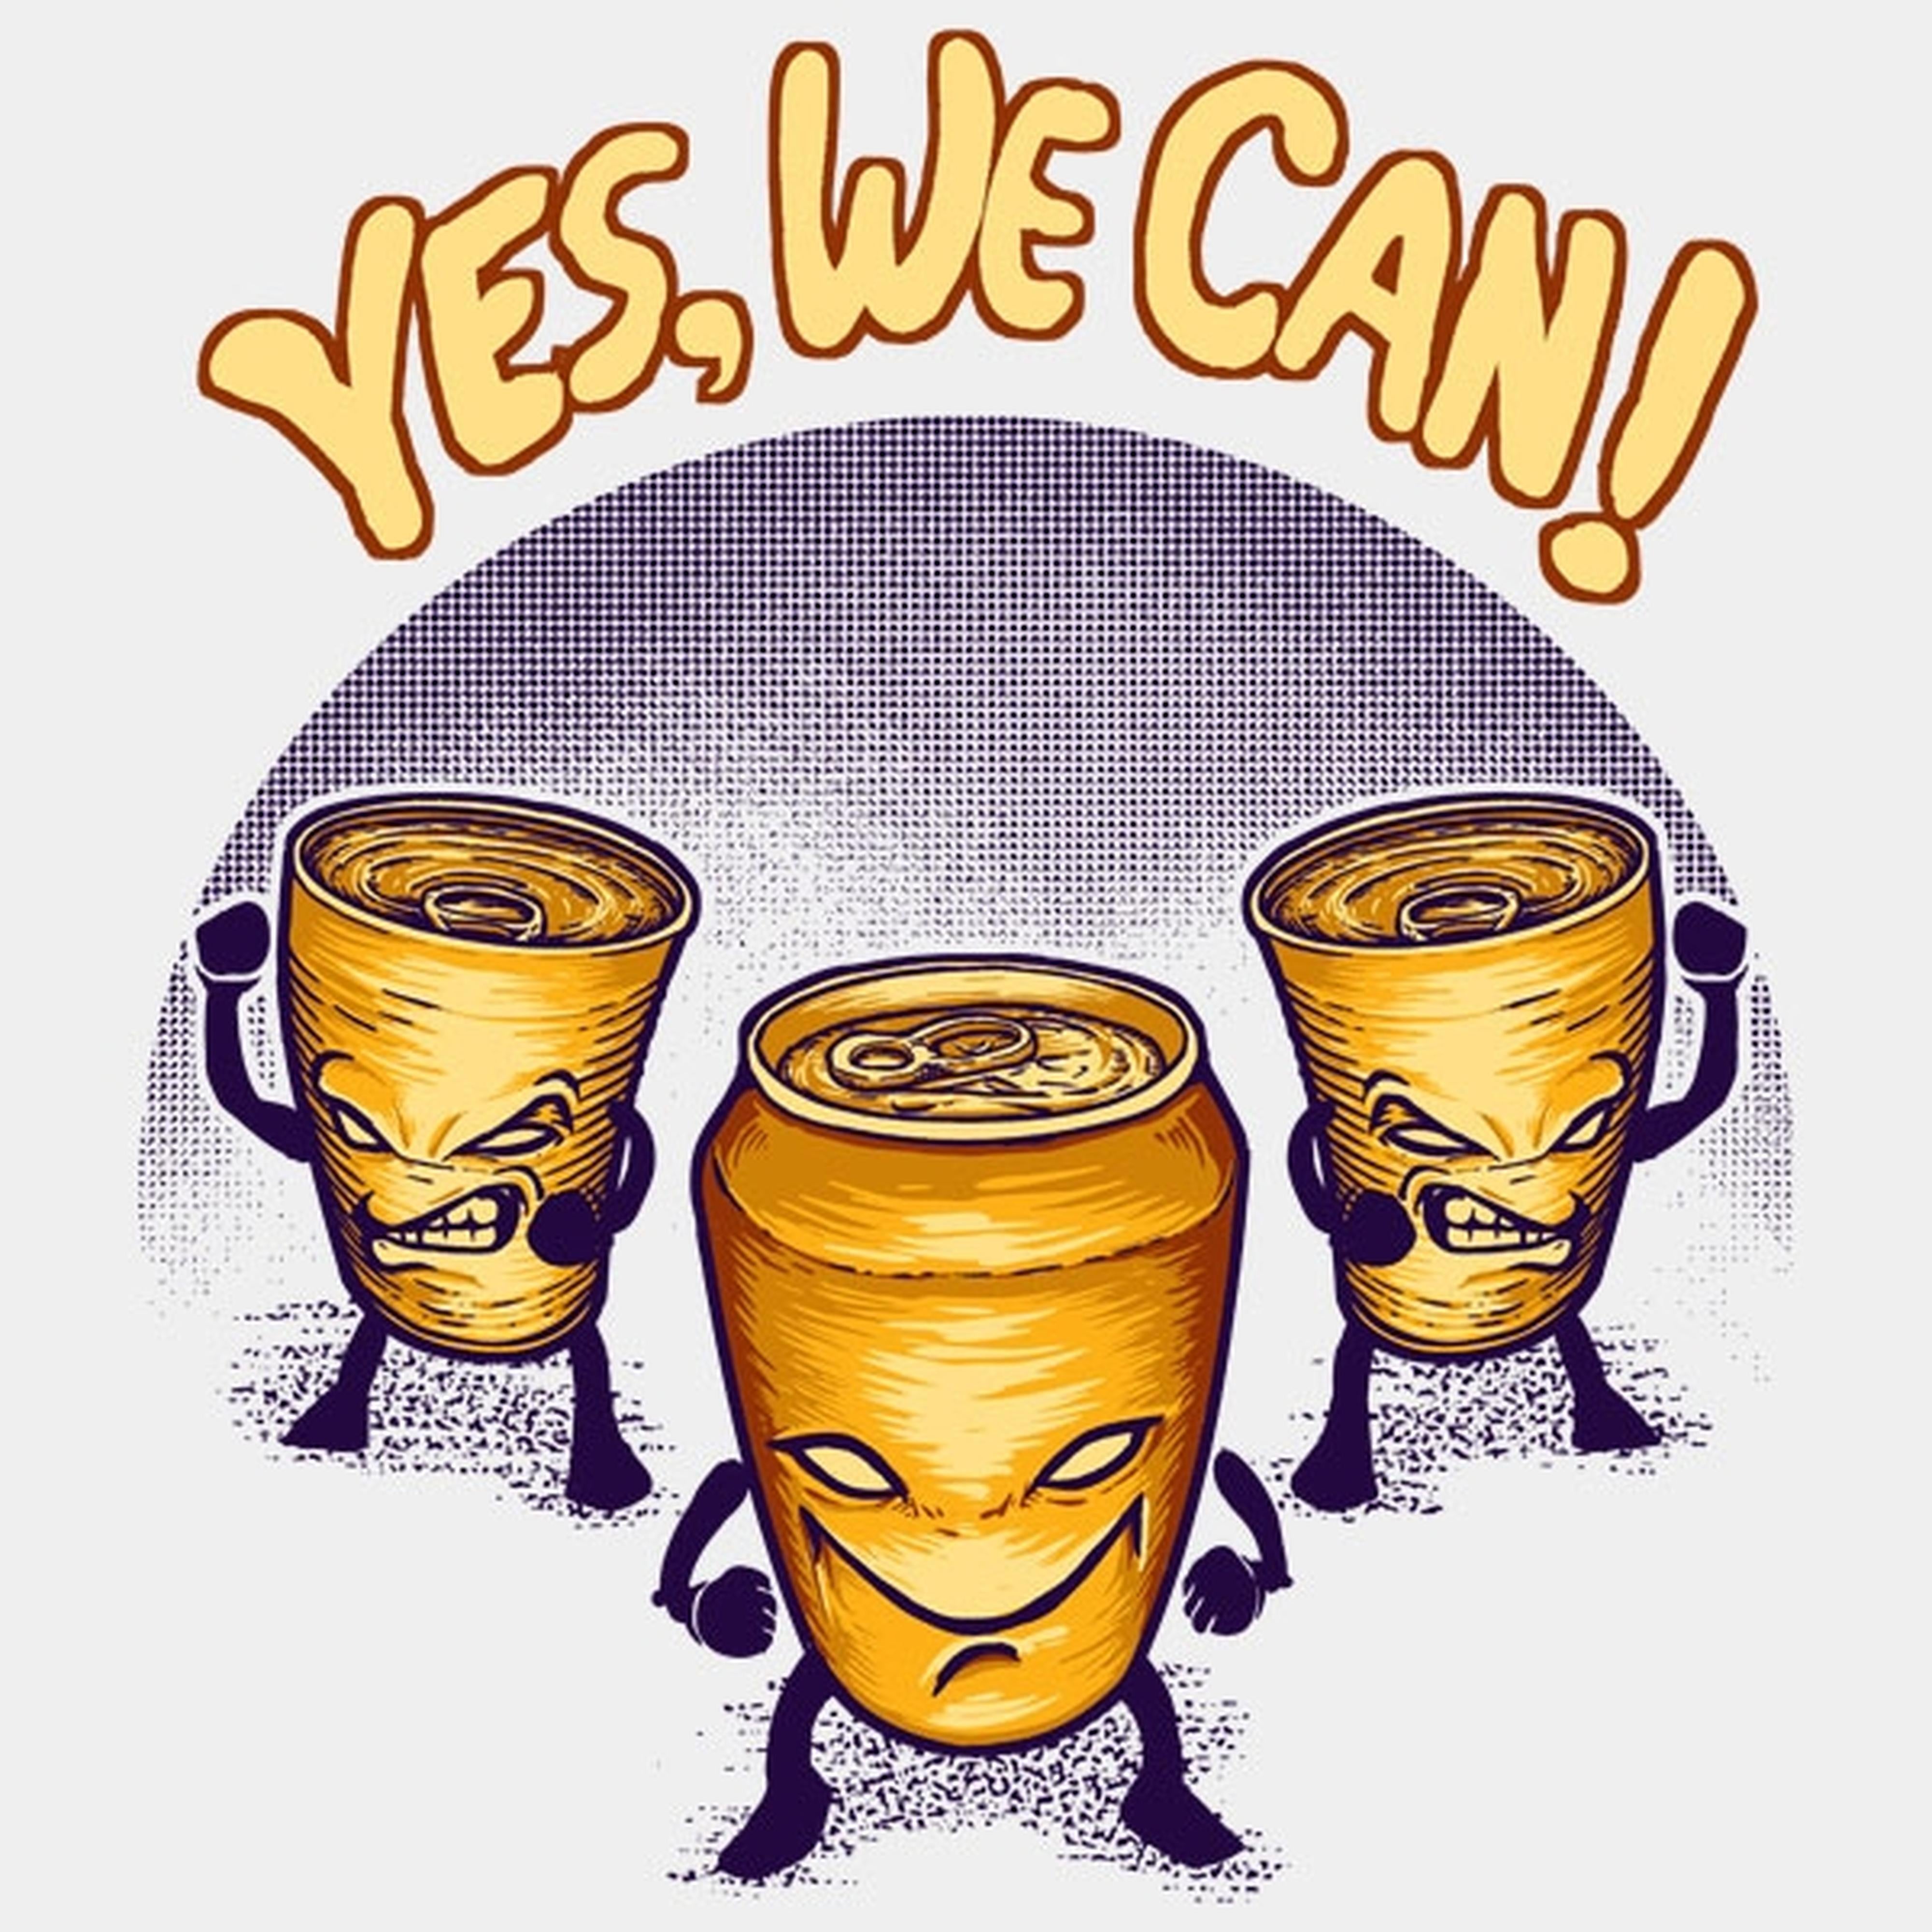 Yes! We can! - T-shirt